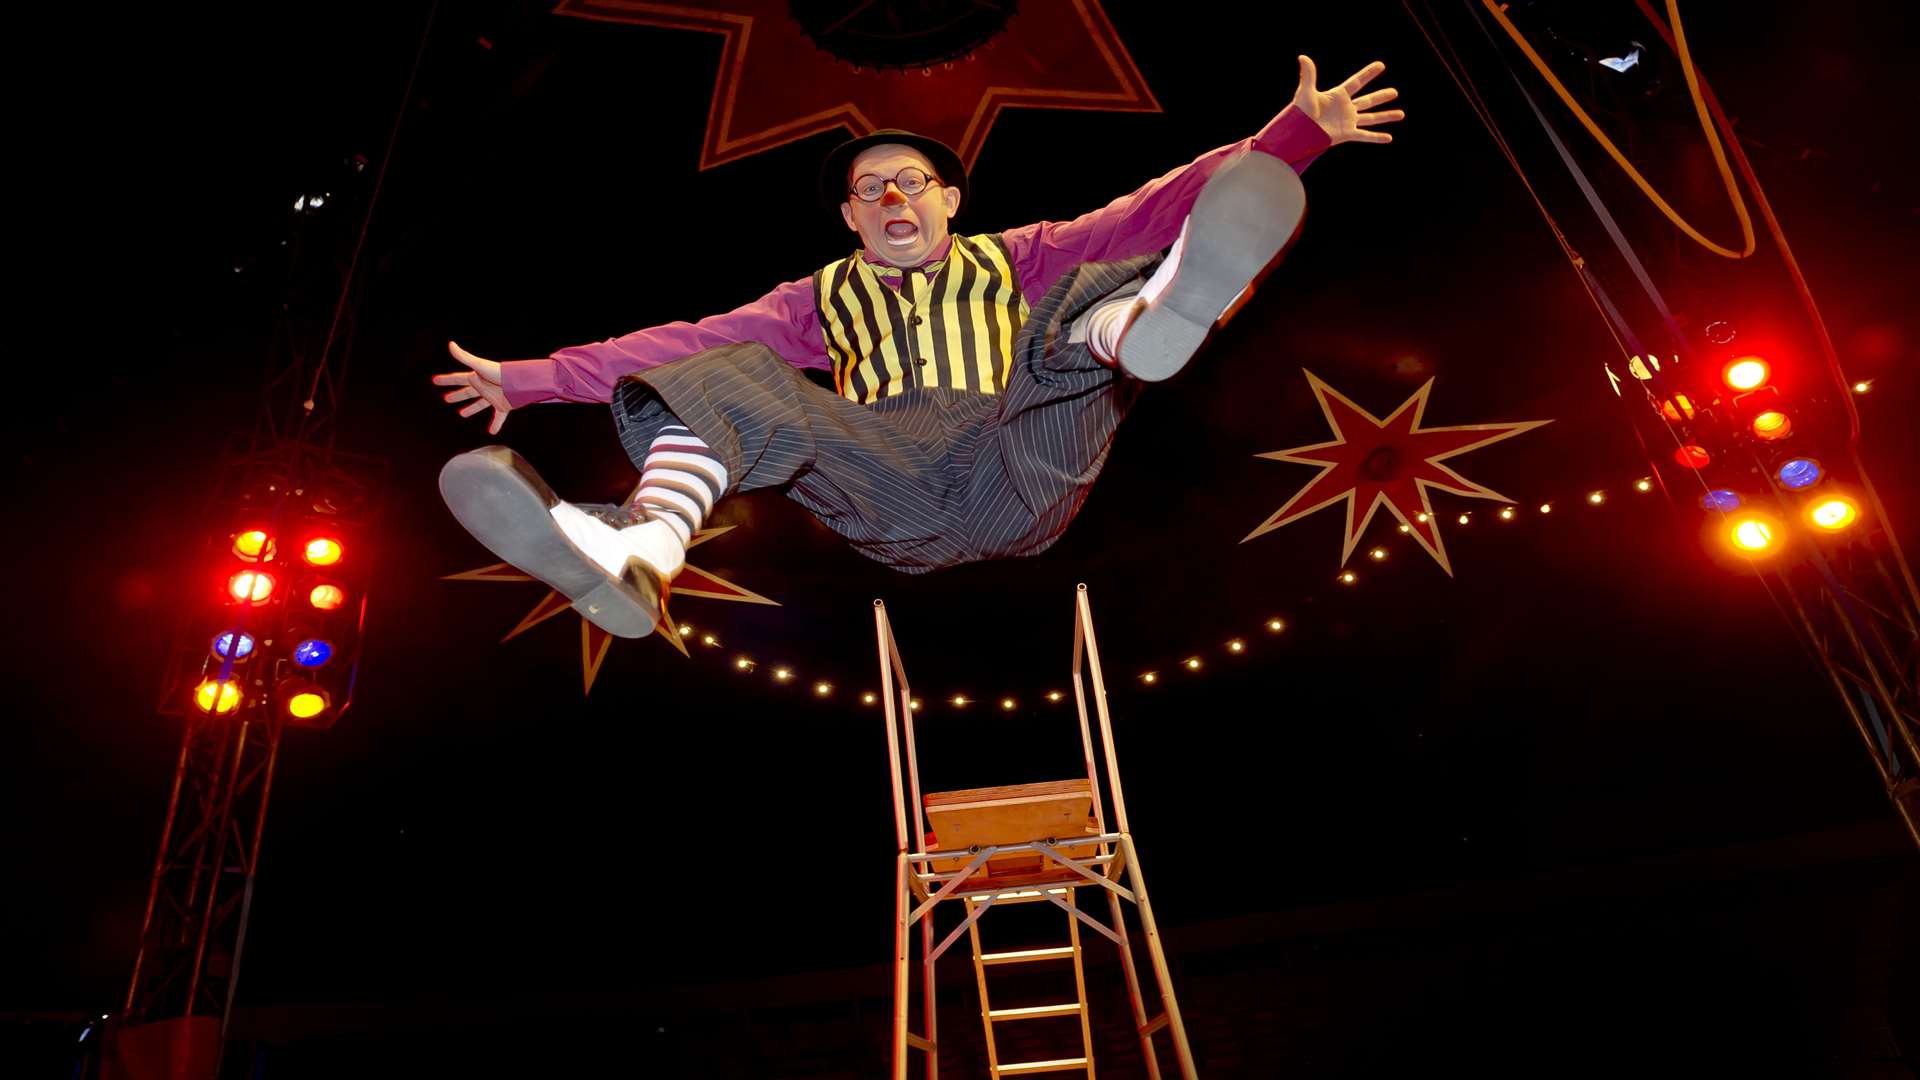 Hitting the heights in the big top